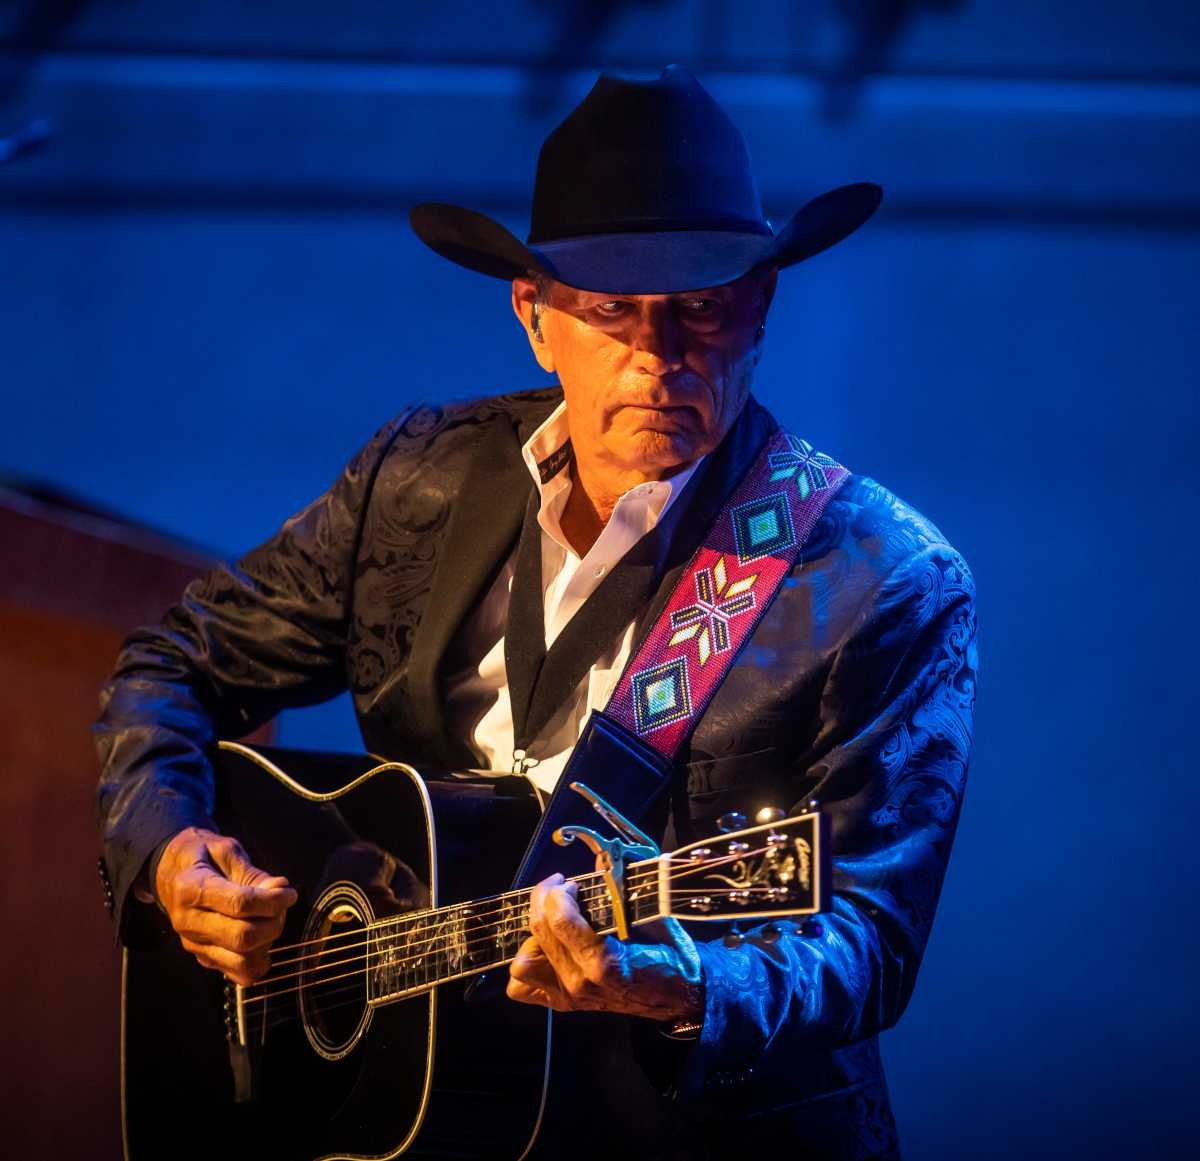 King of Country Music Drops Exciting News